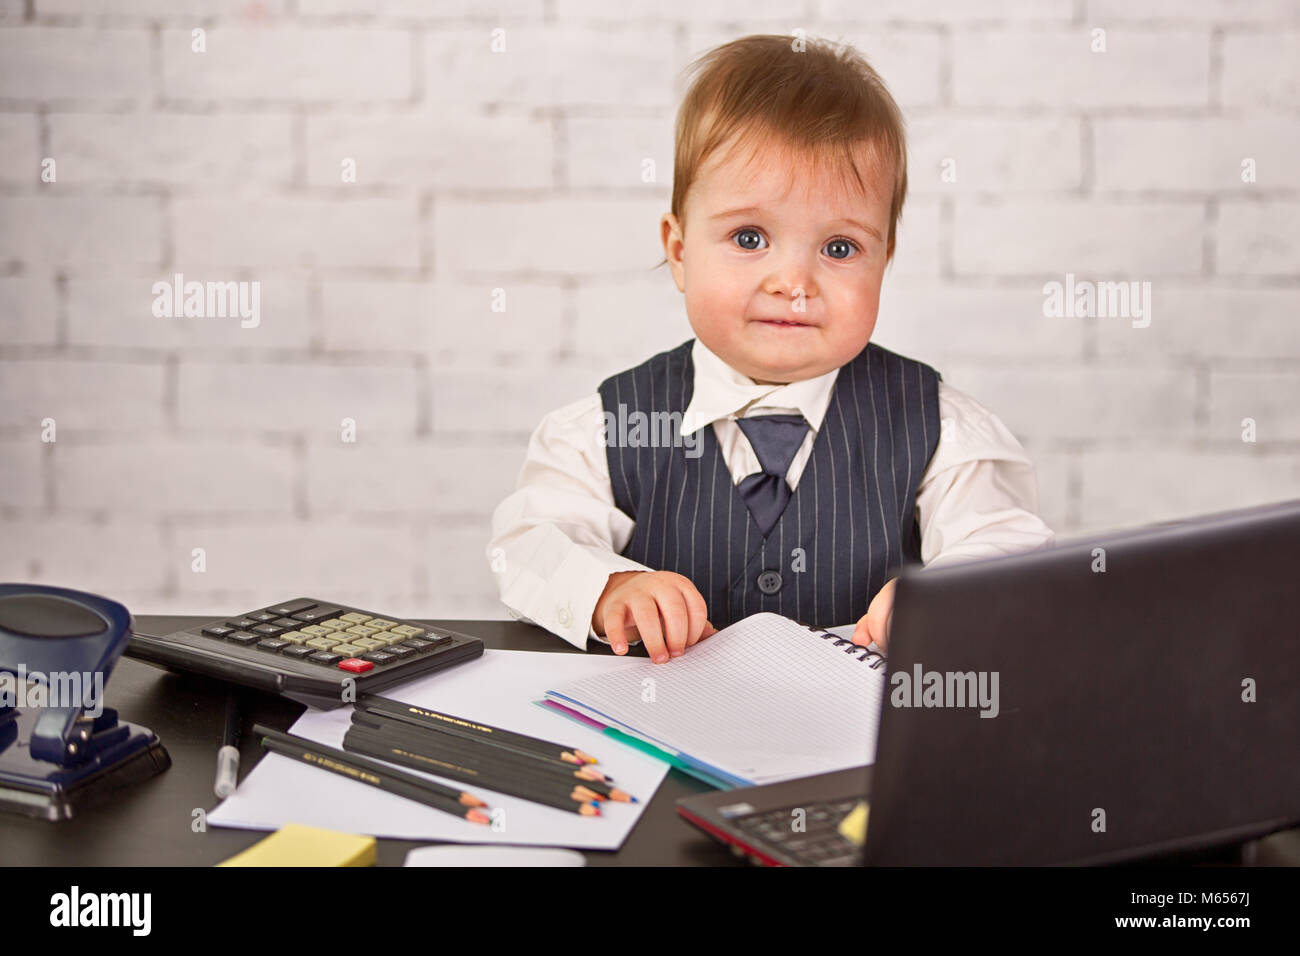 A Cute Blond Child In A Business Suit Is Sitting At The Desk